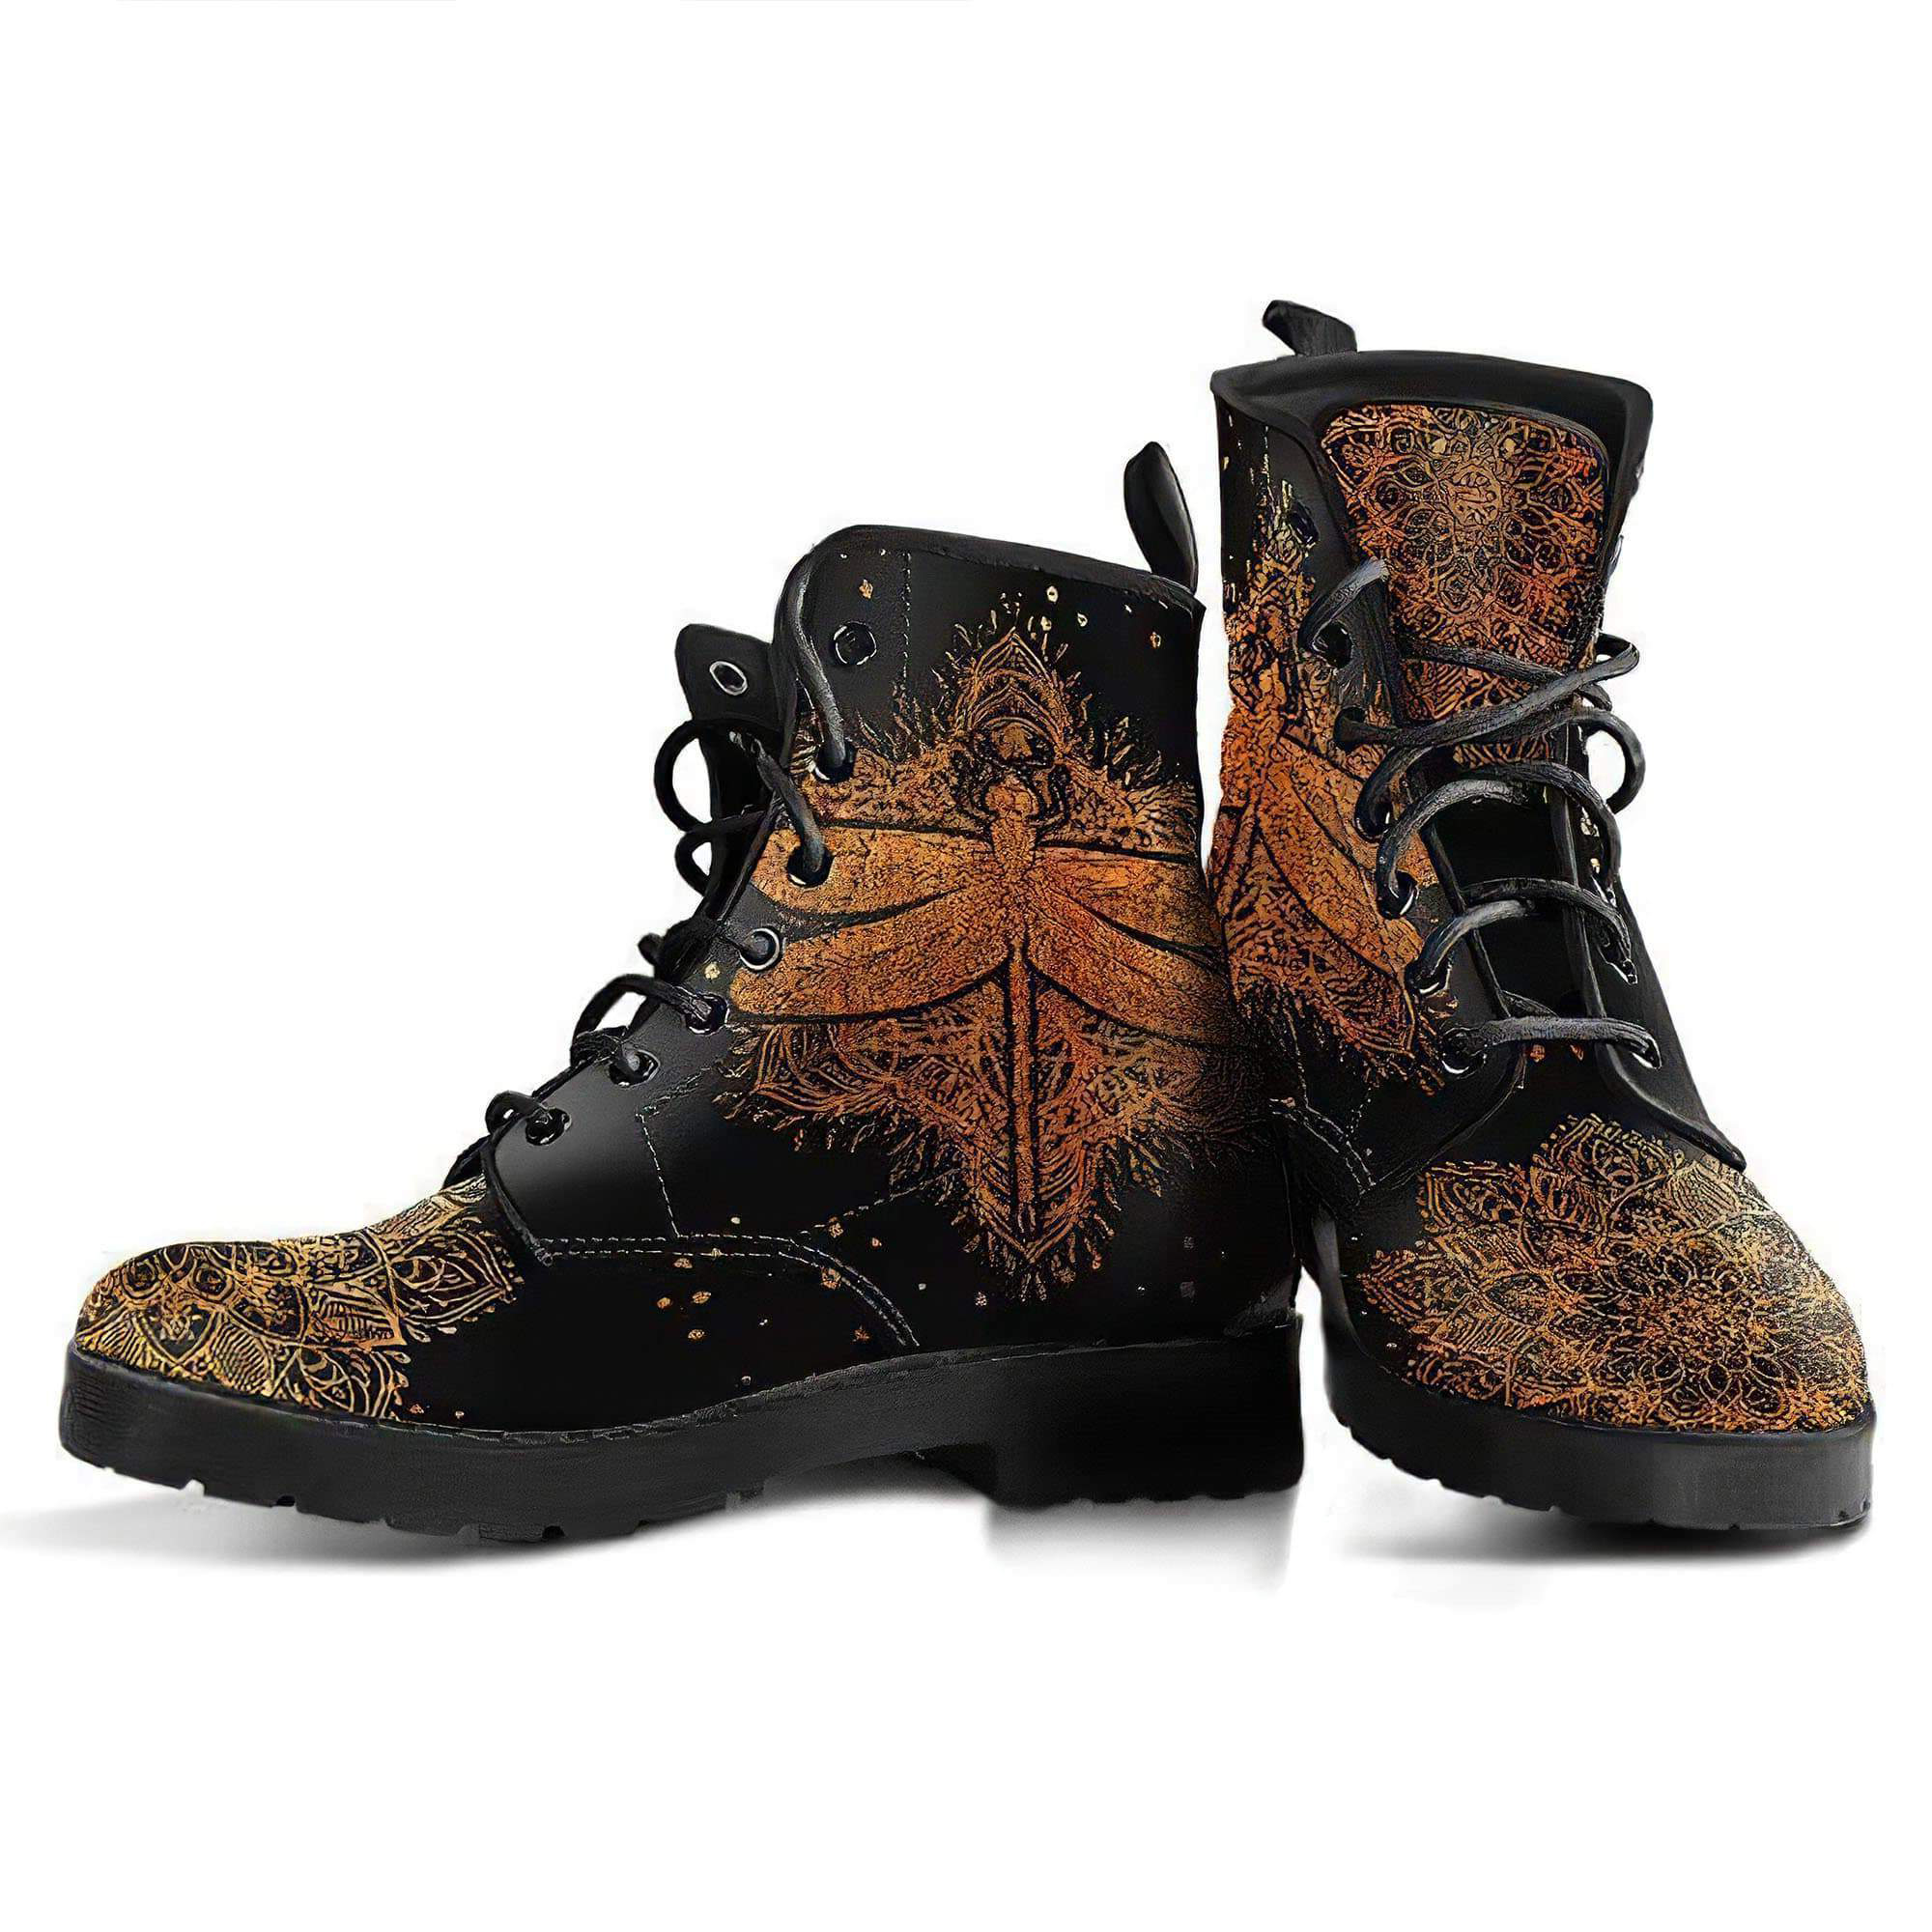 rusty-gold-mandala-dragonfly-handcrafted-boots-women-s-leather-boots-12051946504253.jpg